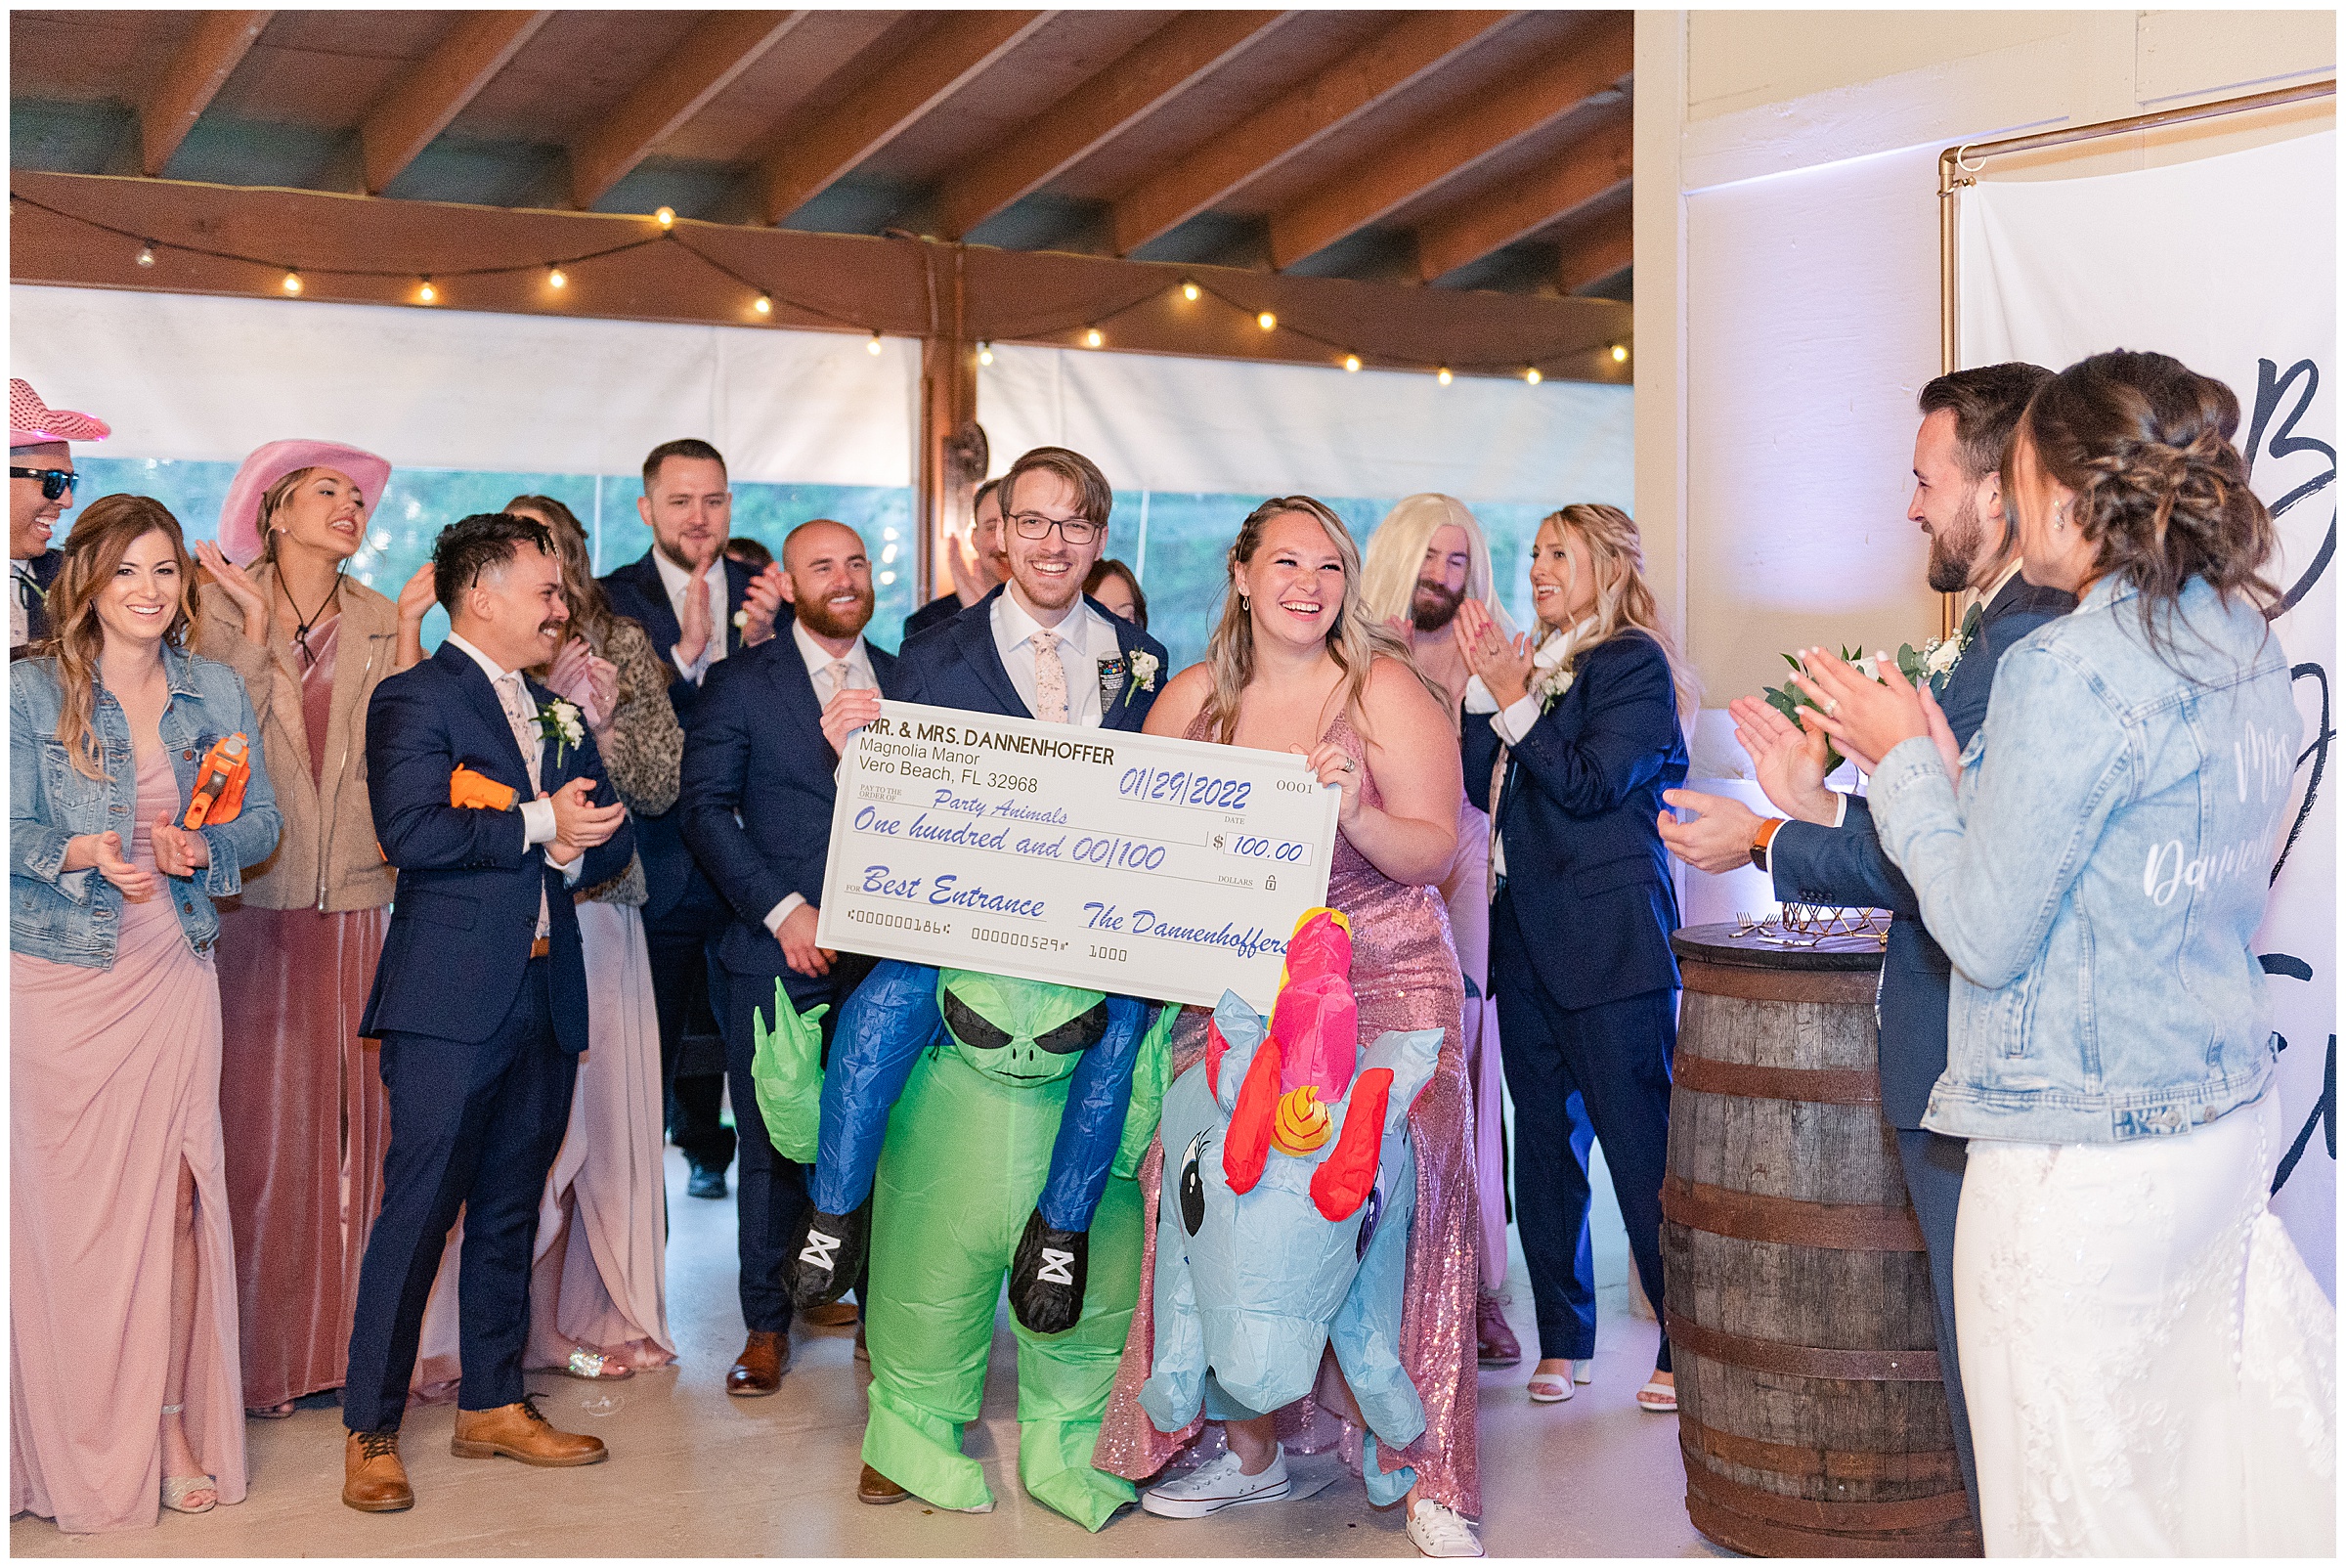 Fun bridal party reception entrance with the bride and groom rewarding a fake check to the best entrance